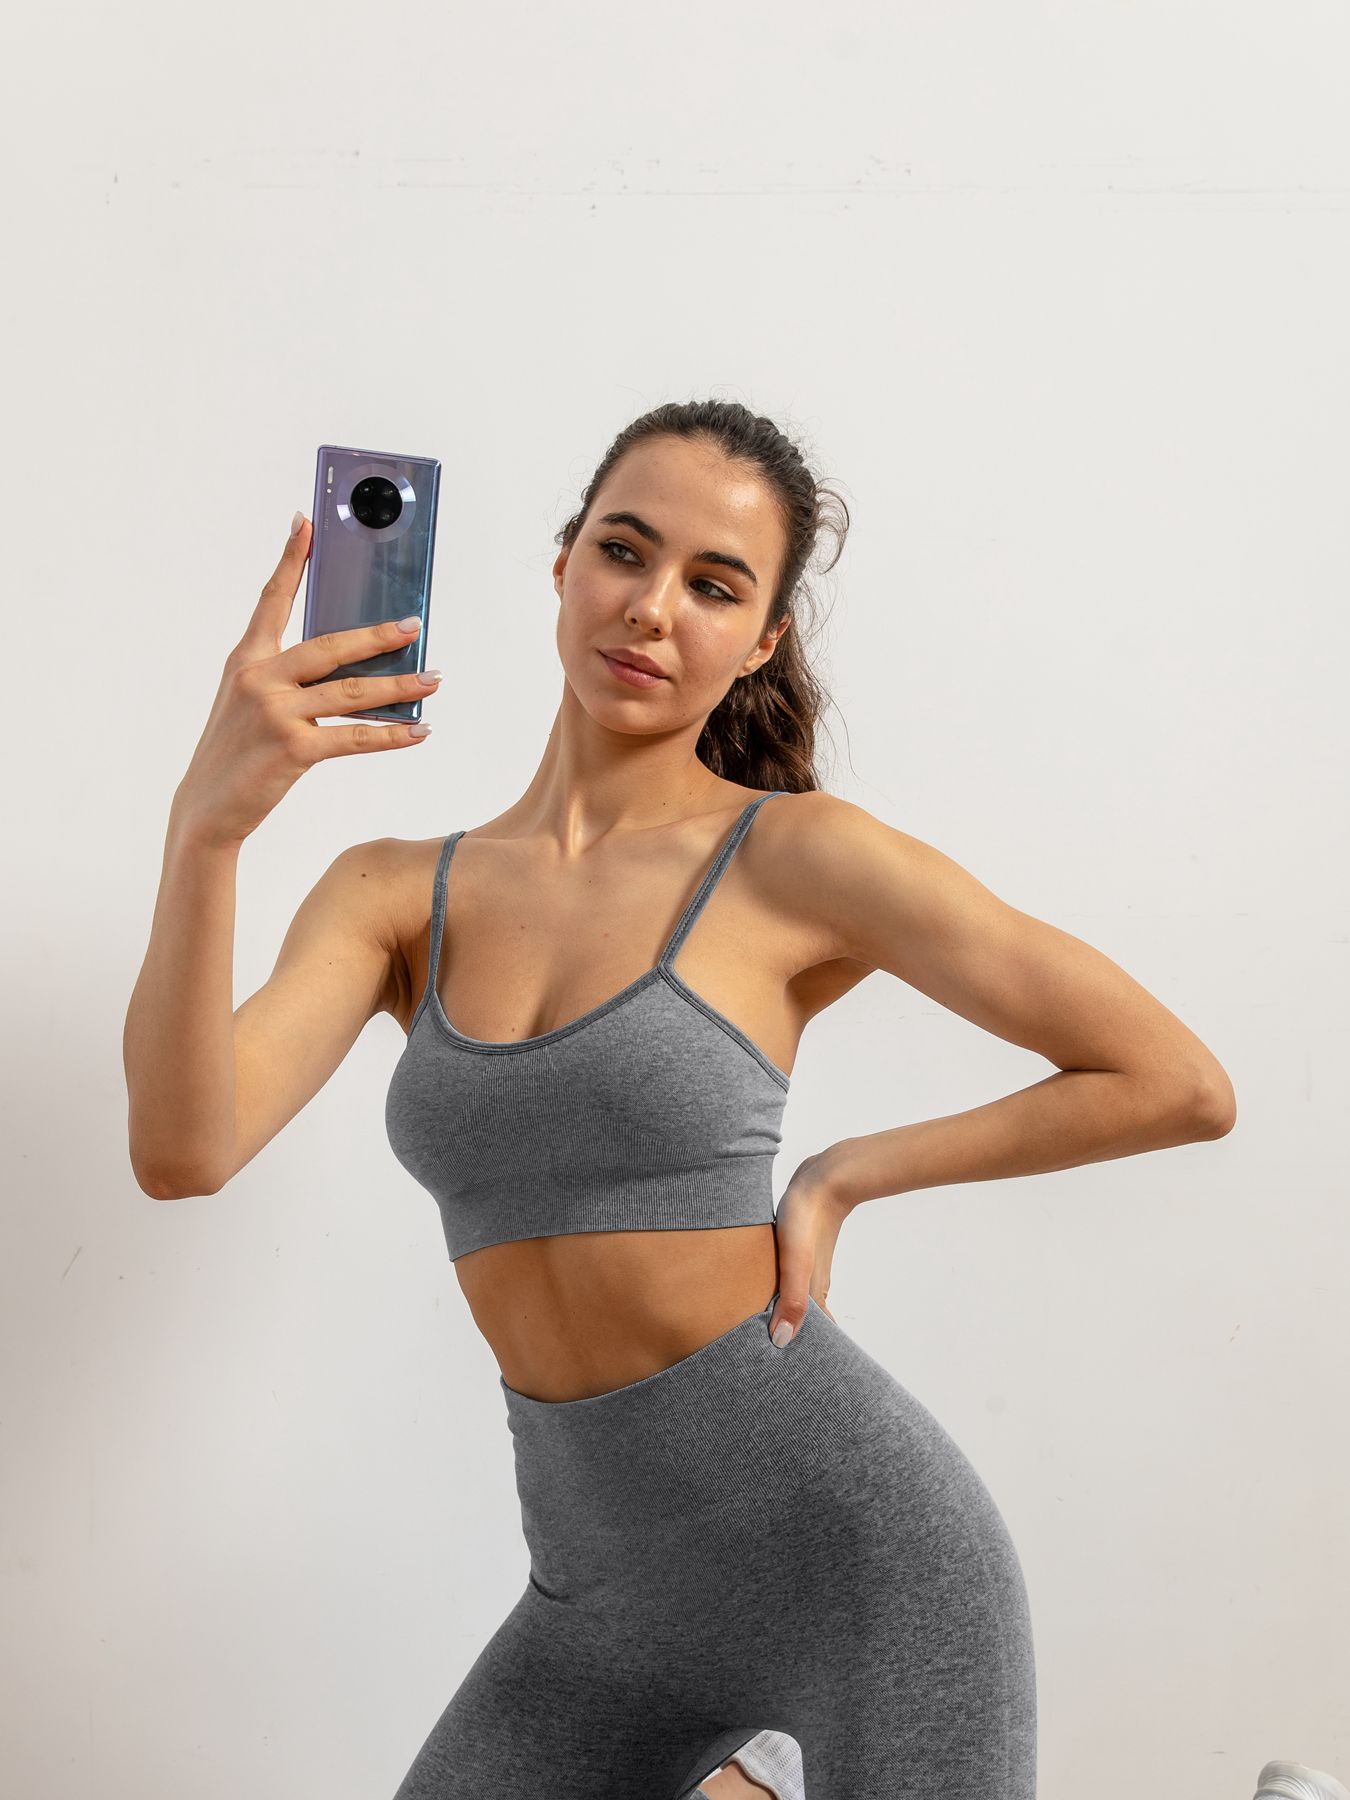 WANAYOU Womens Adjustable Livi Sports Bra With Spaghetti Straps And Padded  Top For Fitness, Running, Gym, Yoga Seamless And Athletic T200601 From  Xue04, $4.84